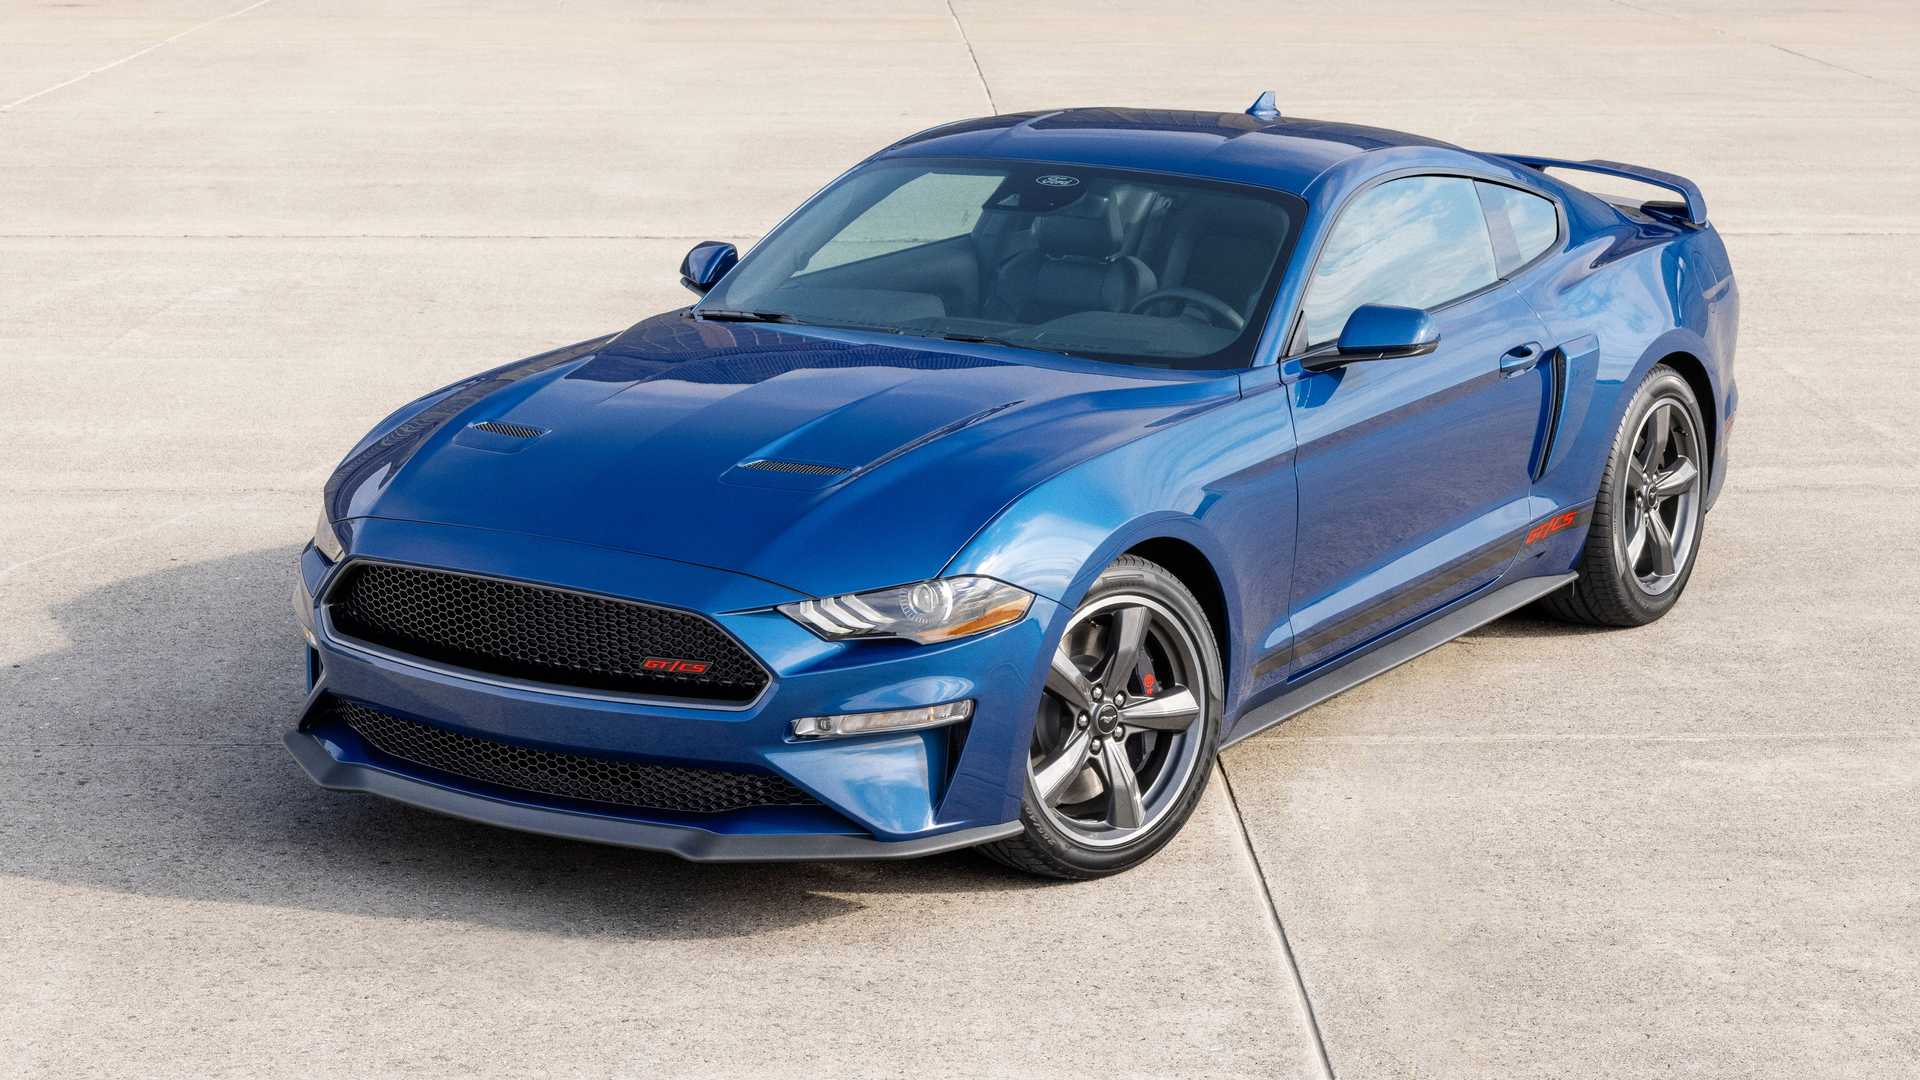 2023 Ford Mustang Engineer Says He Worked On Hybrid Engines